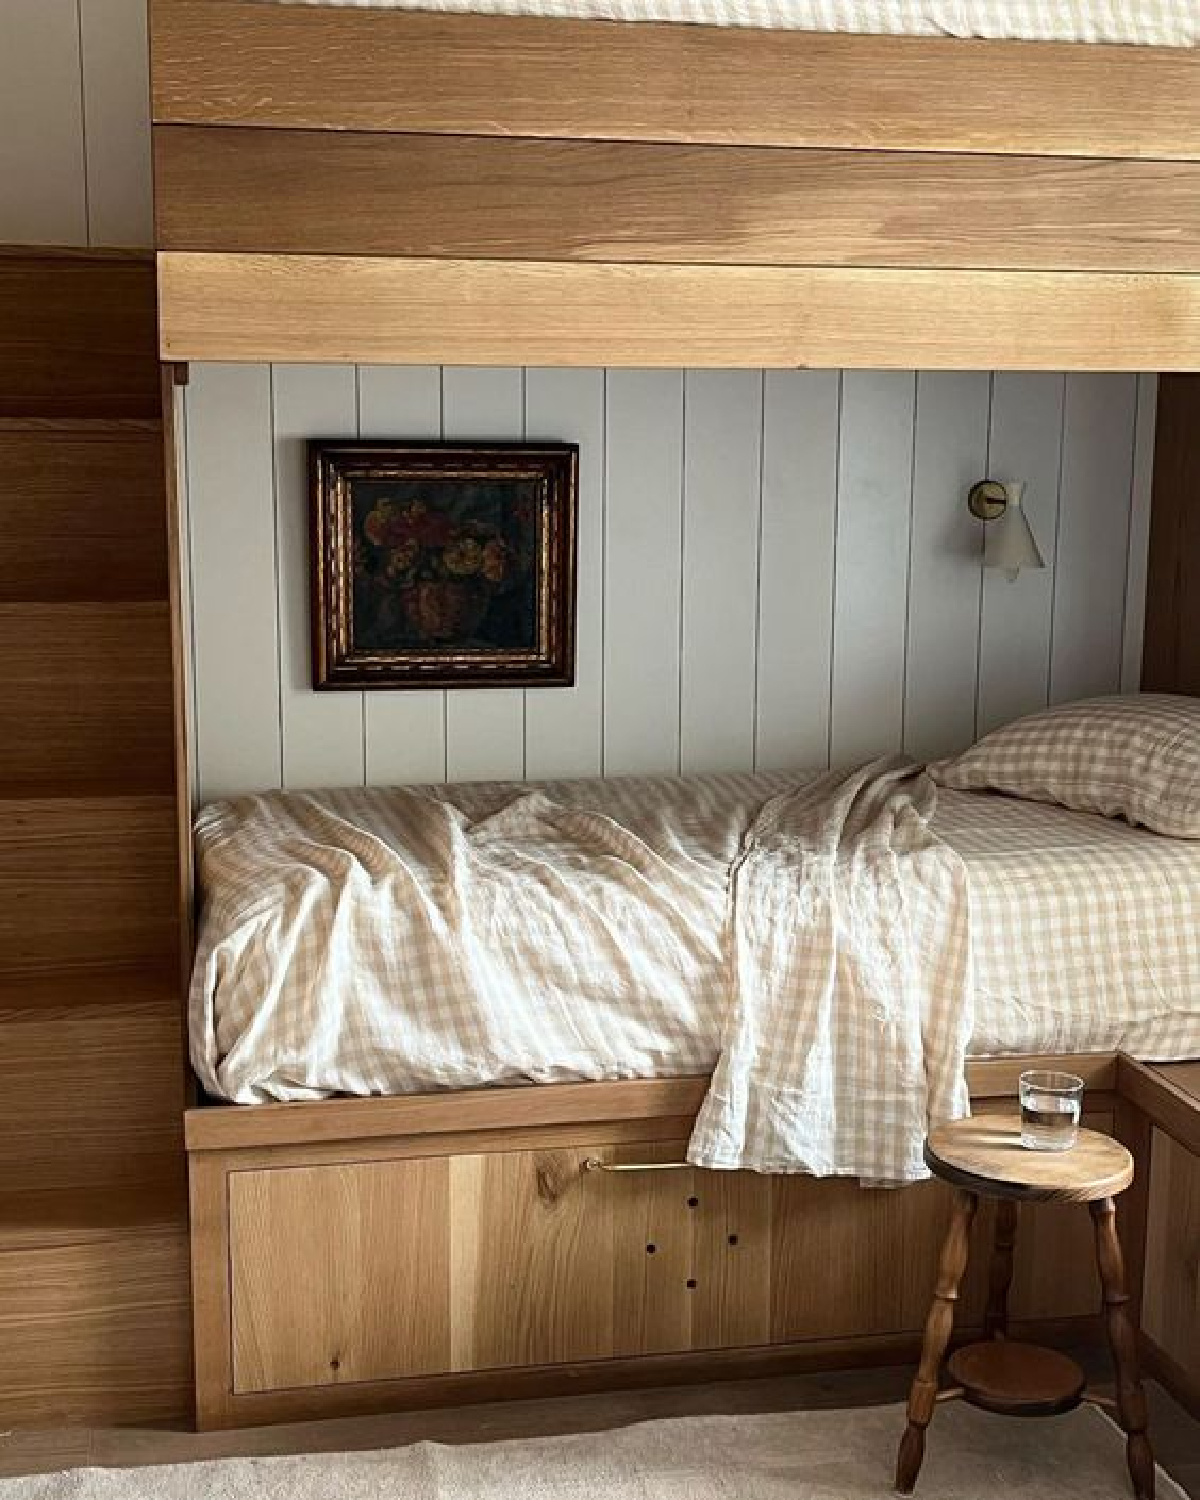 Beautiful bunk bed design by Light and Dwell. #bunkbeds